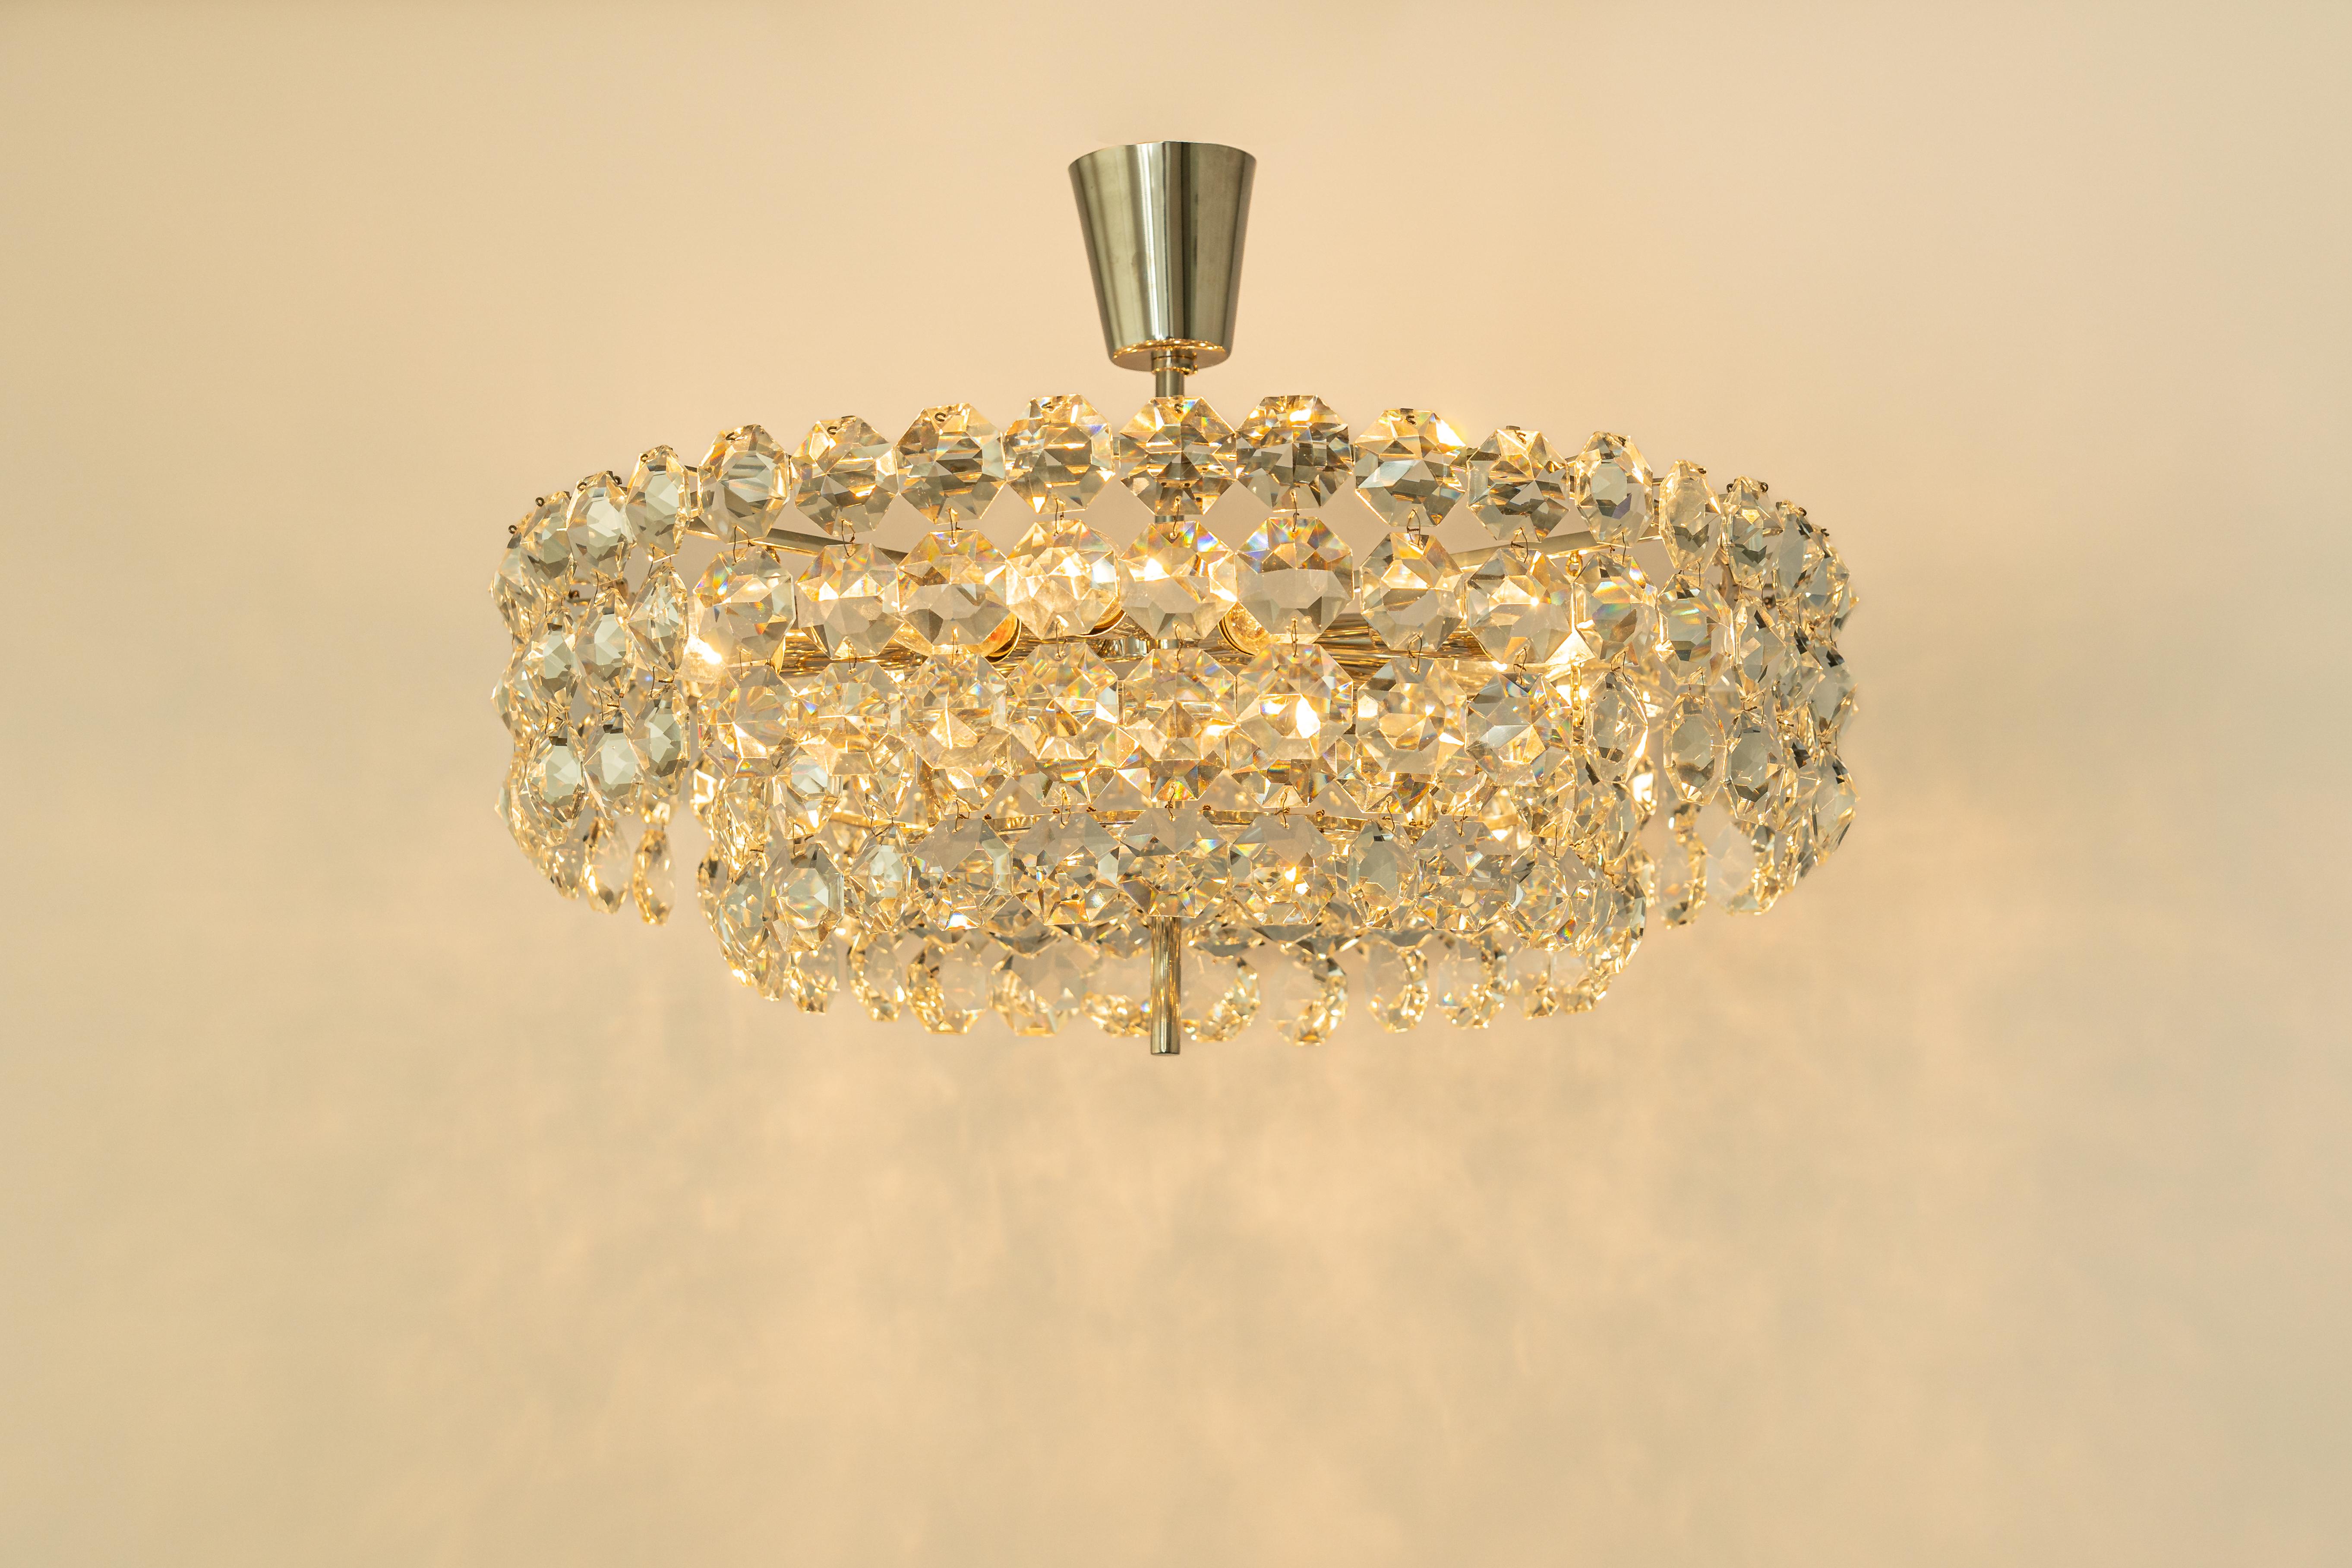 Bakalowits Chandelier, Chrome and Crystal Glass, Austria, 1960s For Sale 6